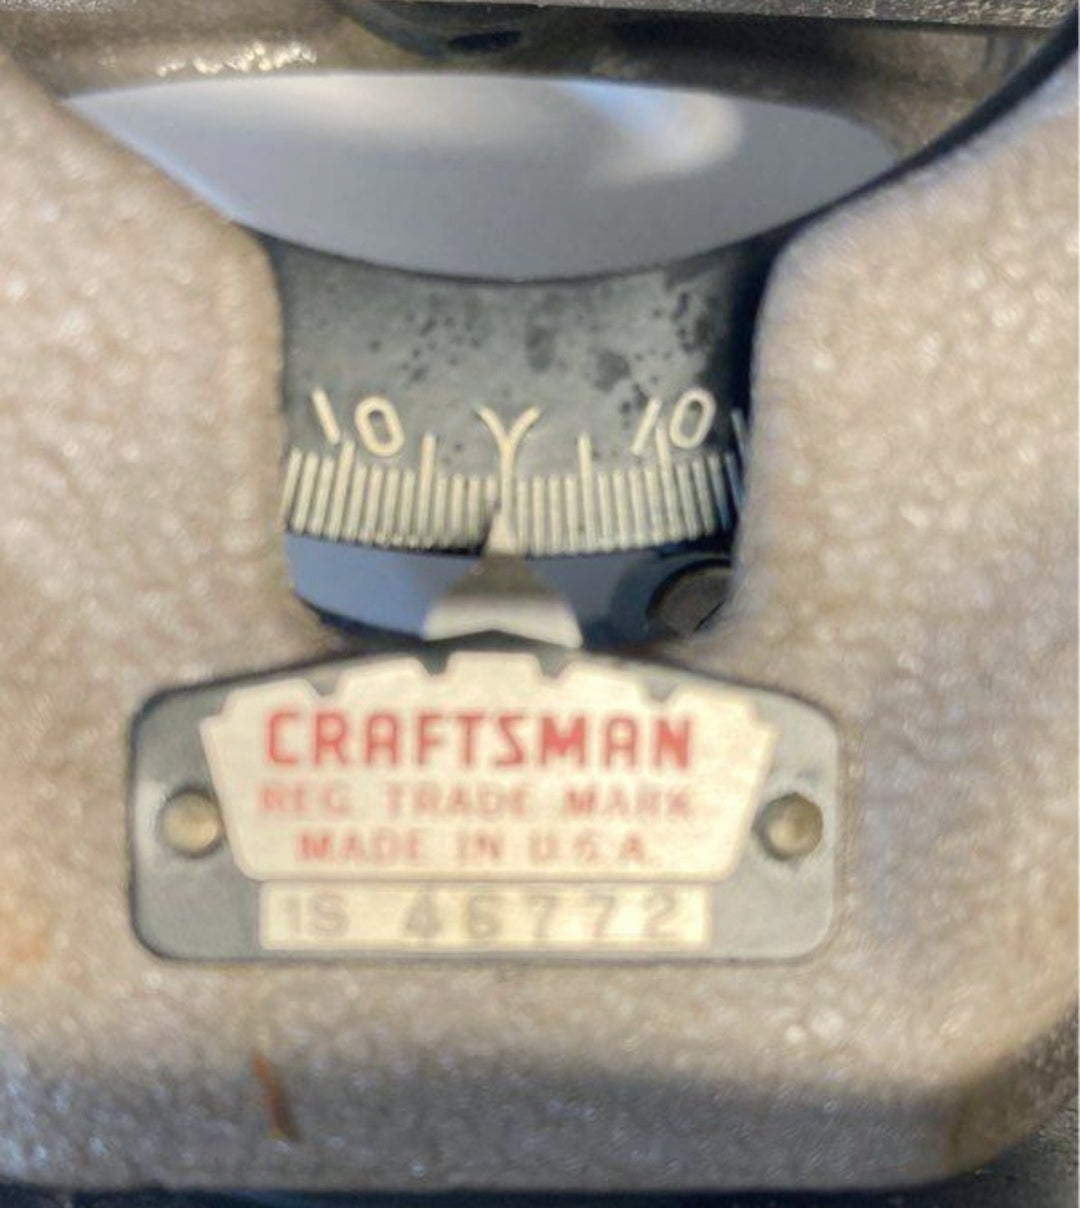 Craftsman *Transit Survey Level with Wooden Box #IS-46772